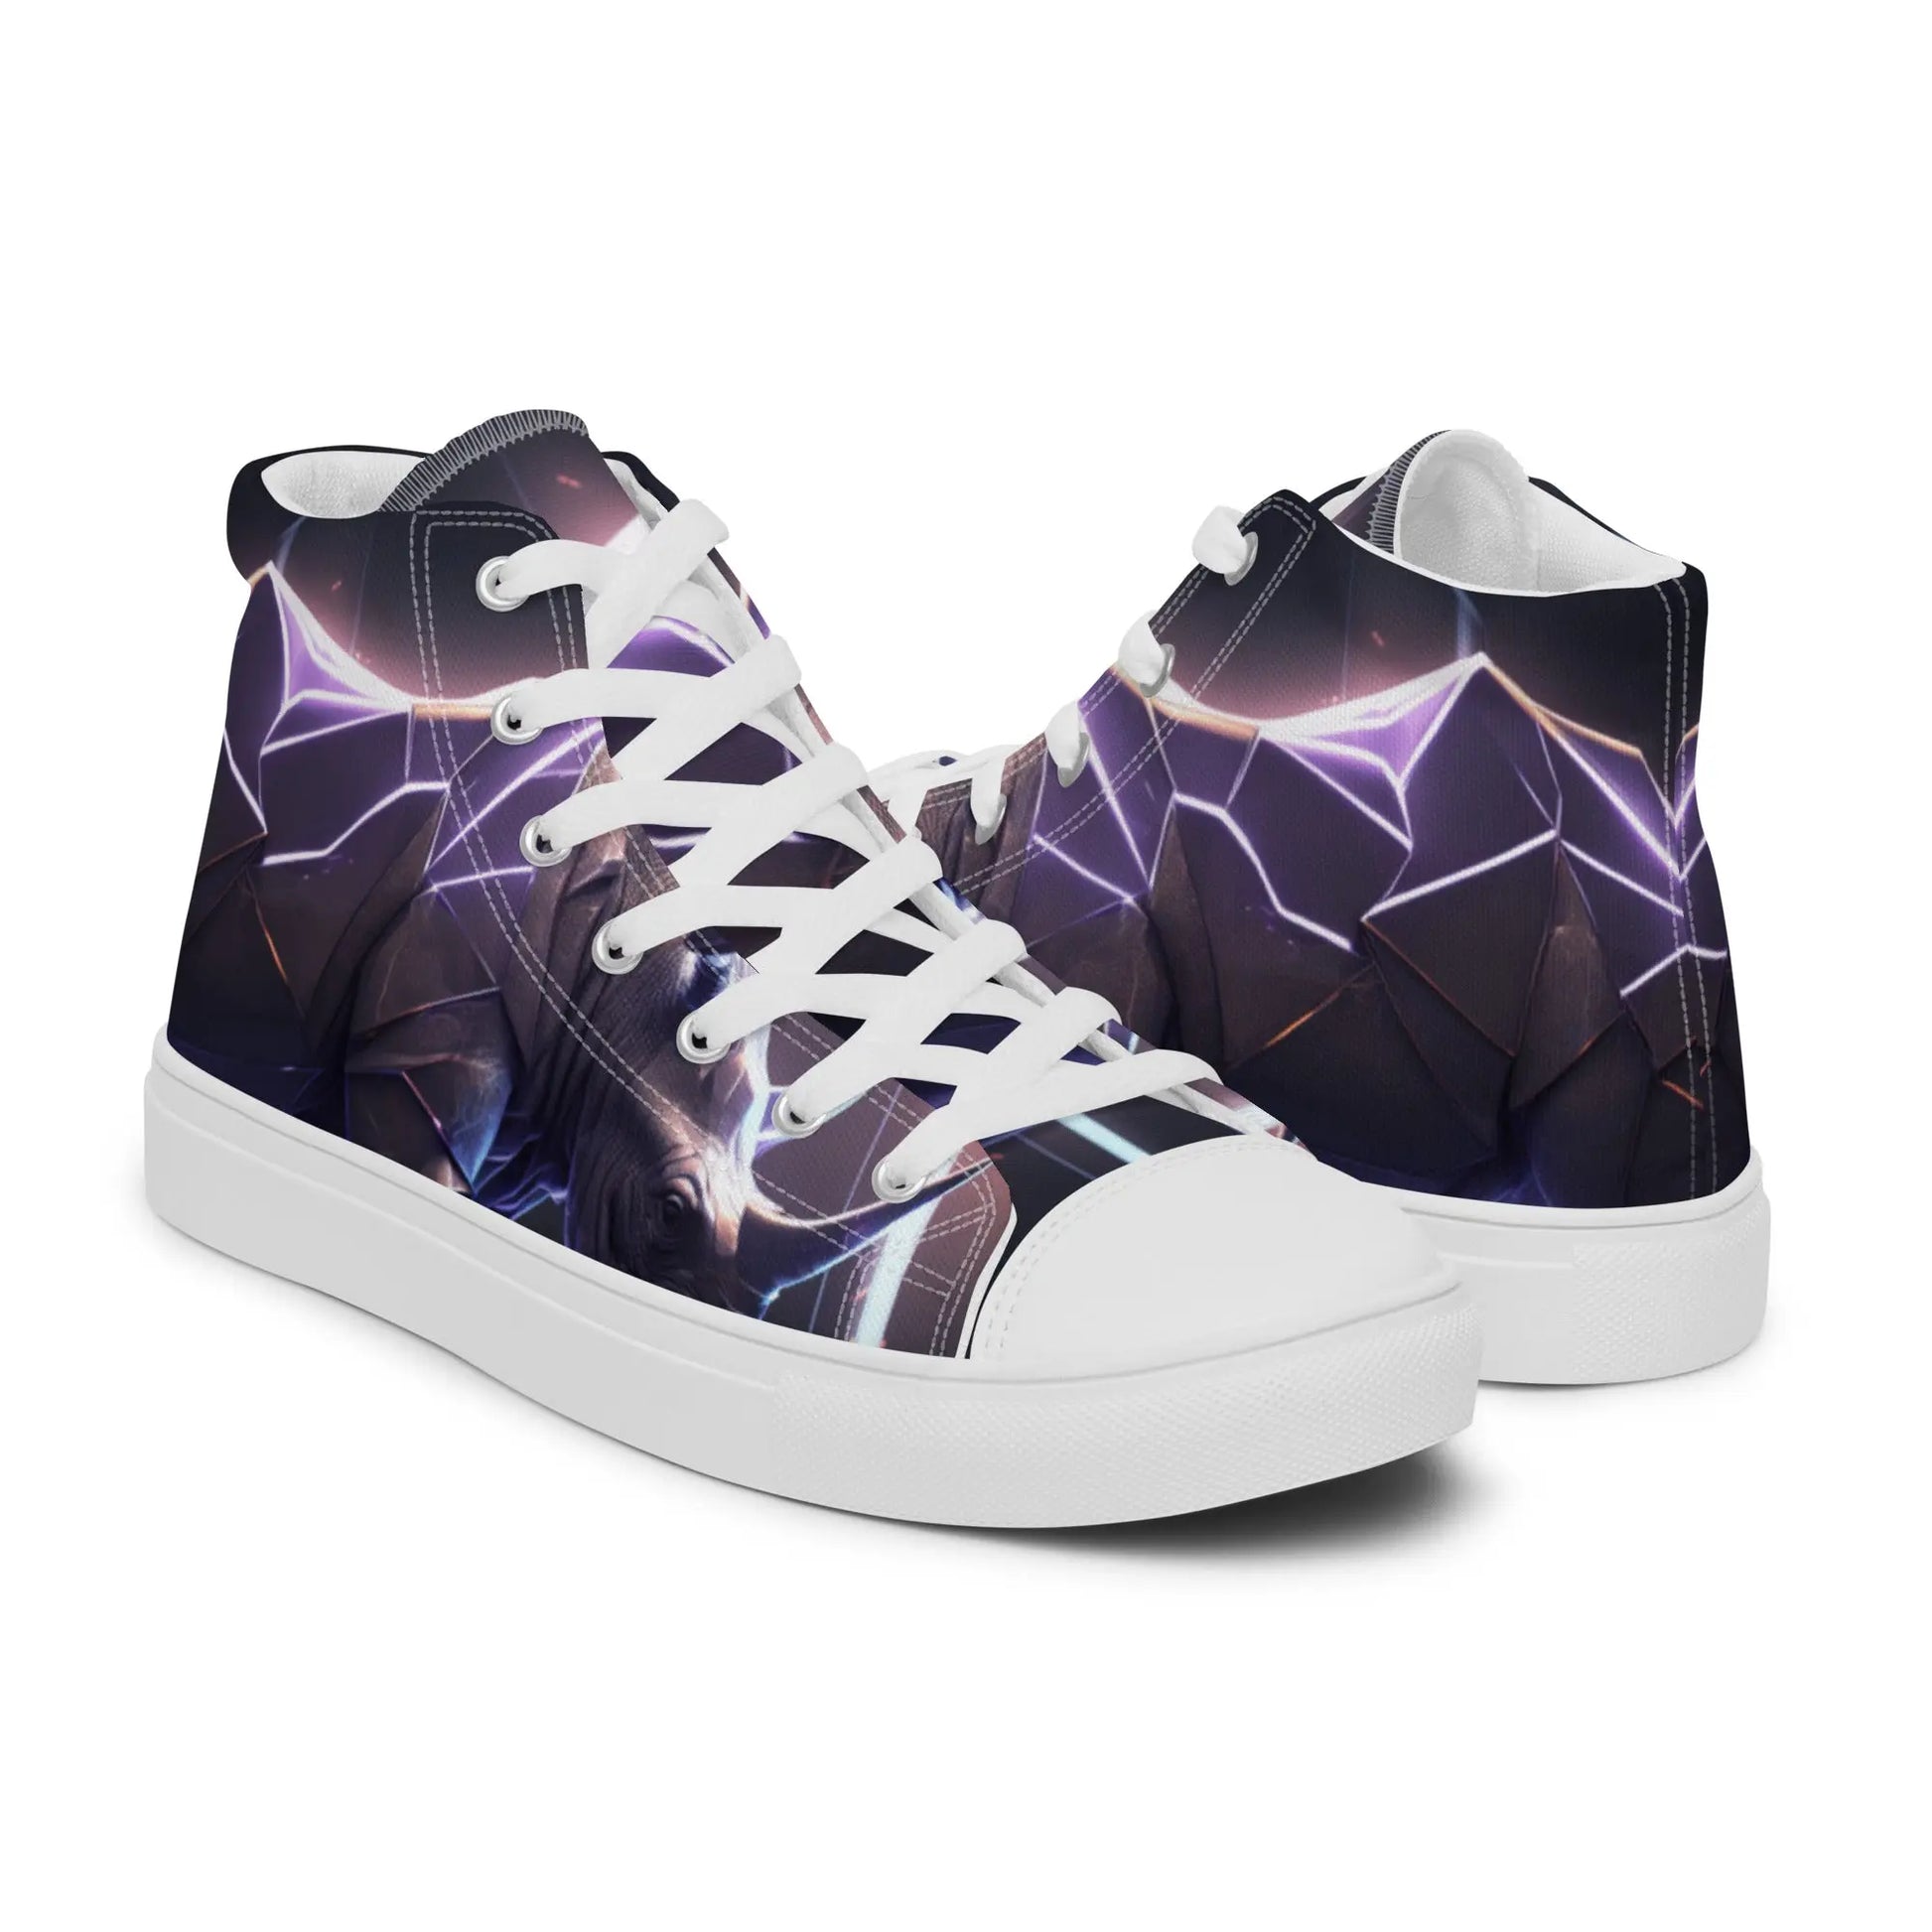 Rhino Glow High Top Sneakers: AI-Engineered, Unisex, Unleash Your Wild Style with Vibrant, Fluorescent, Animal Print, Durable, Comfortable Footwear Kinetic Footwear